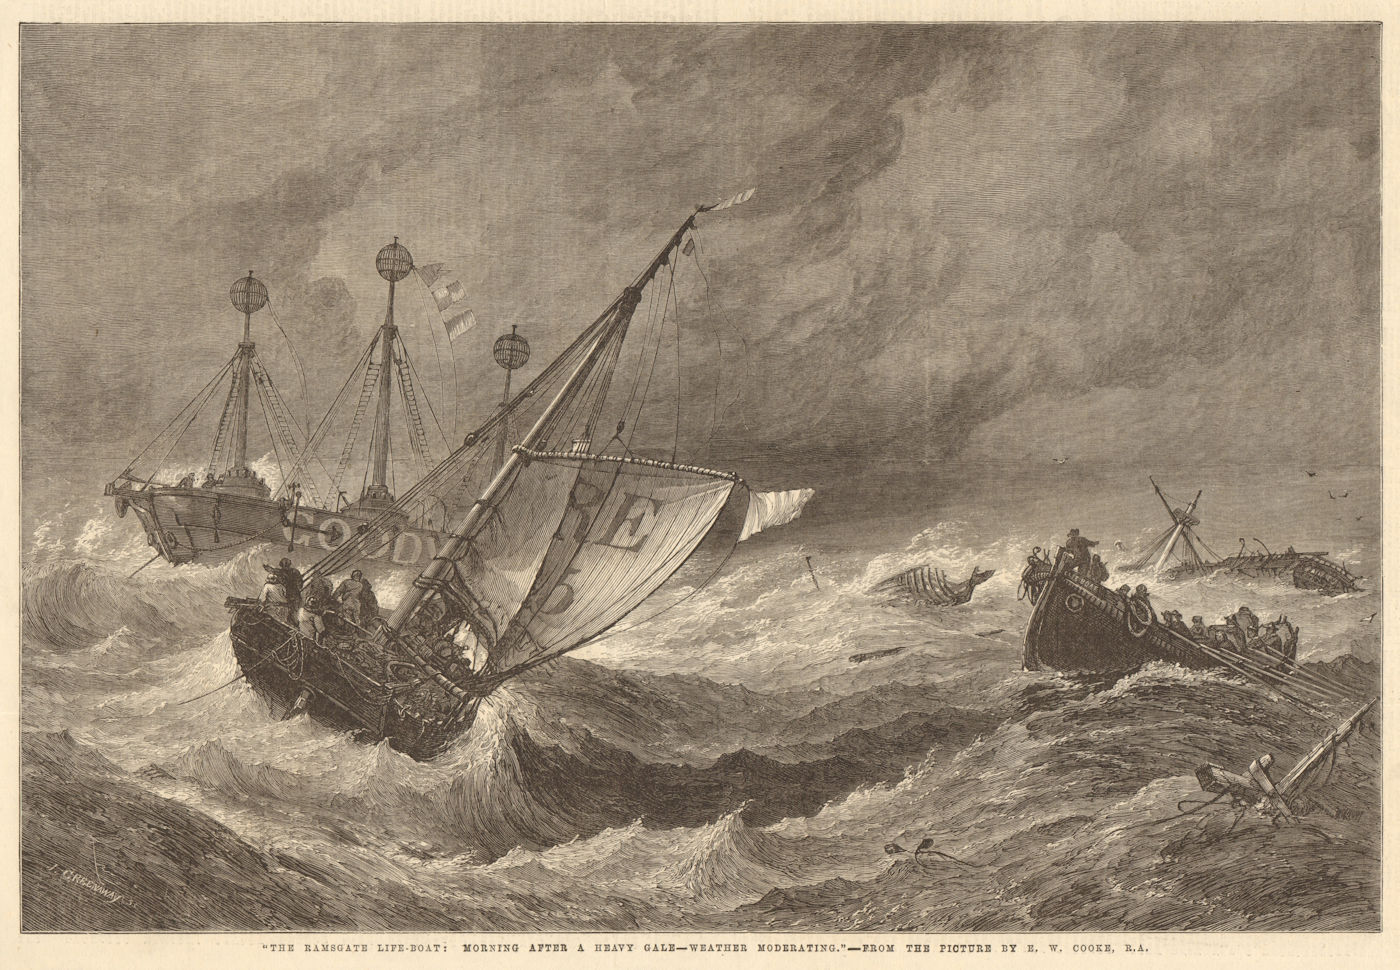 Associate Product "The Ramsgate life-boat; morning after a heavy gale", by E. W. Cooke 1864